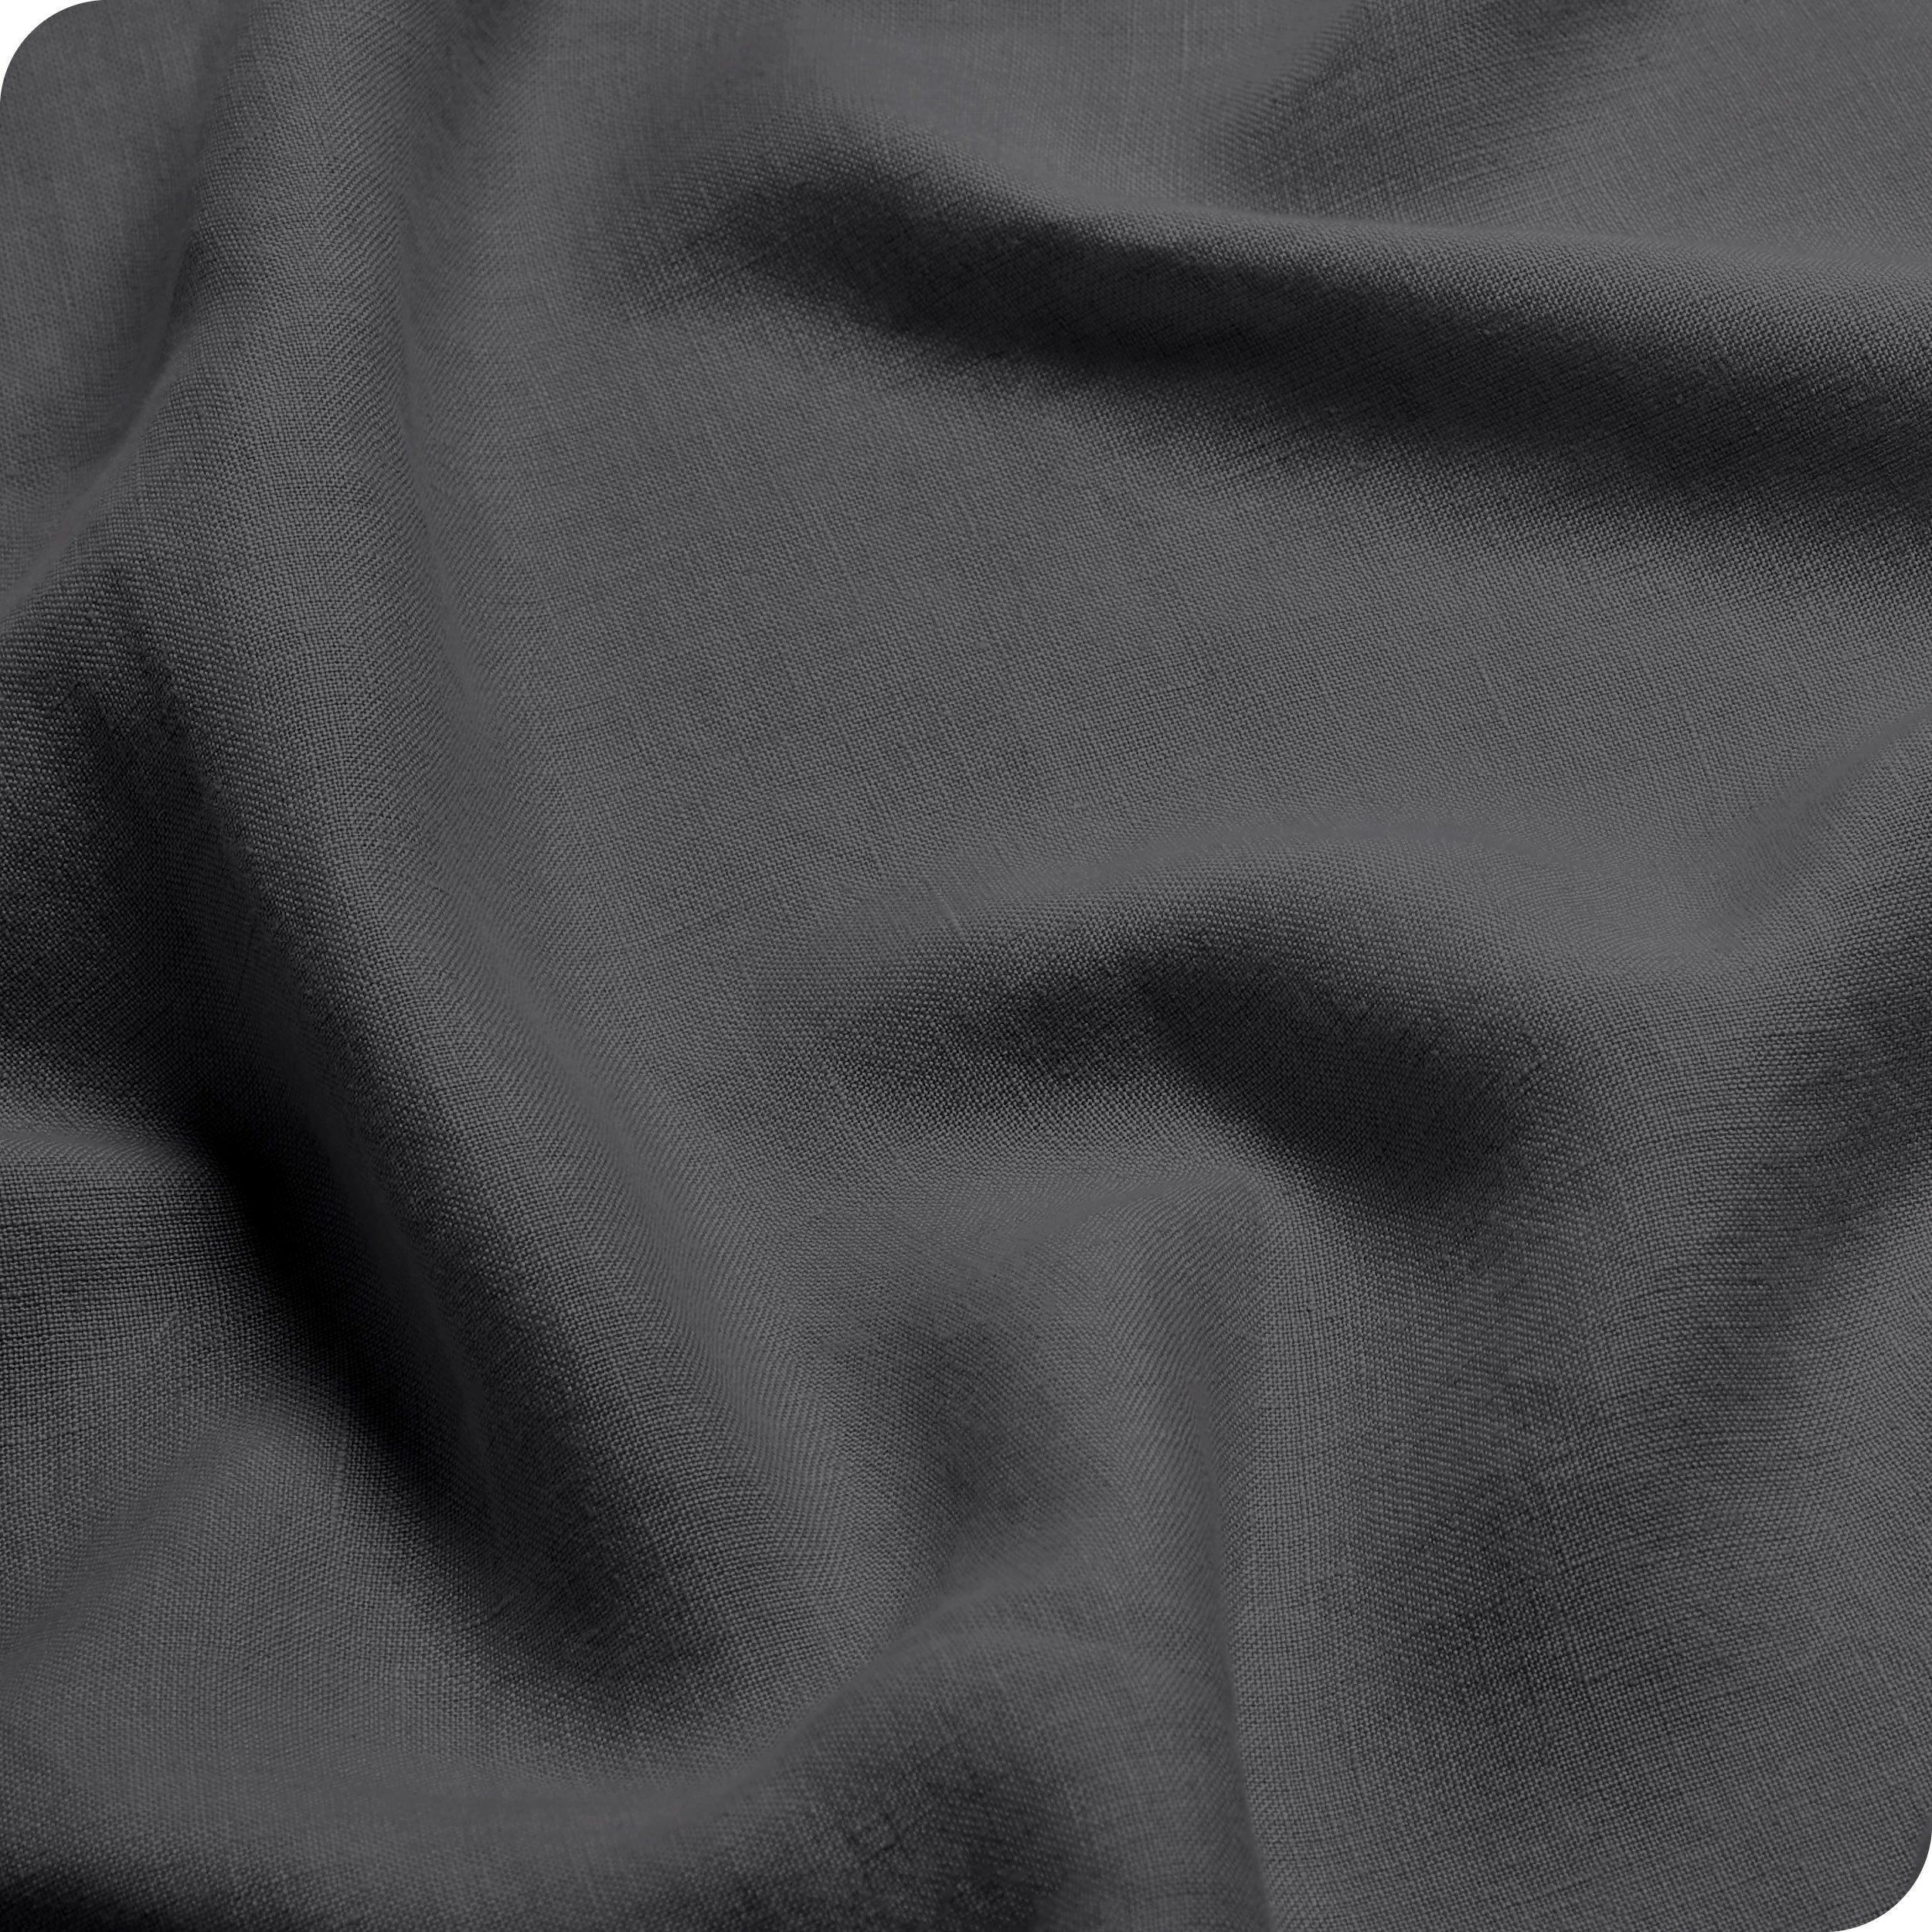 Close in view showing texture of linen sheet set fabric